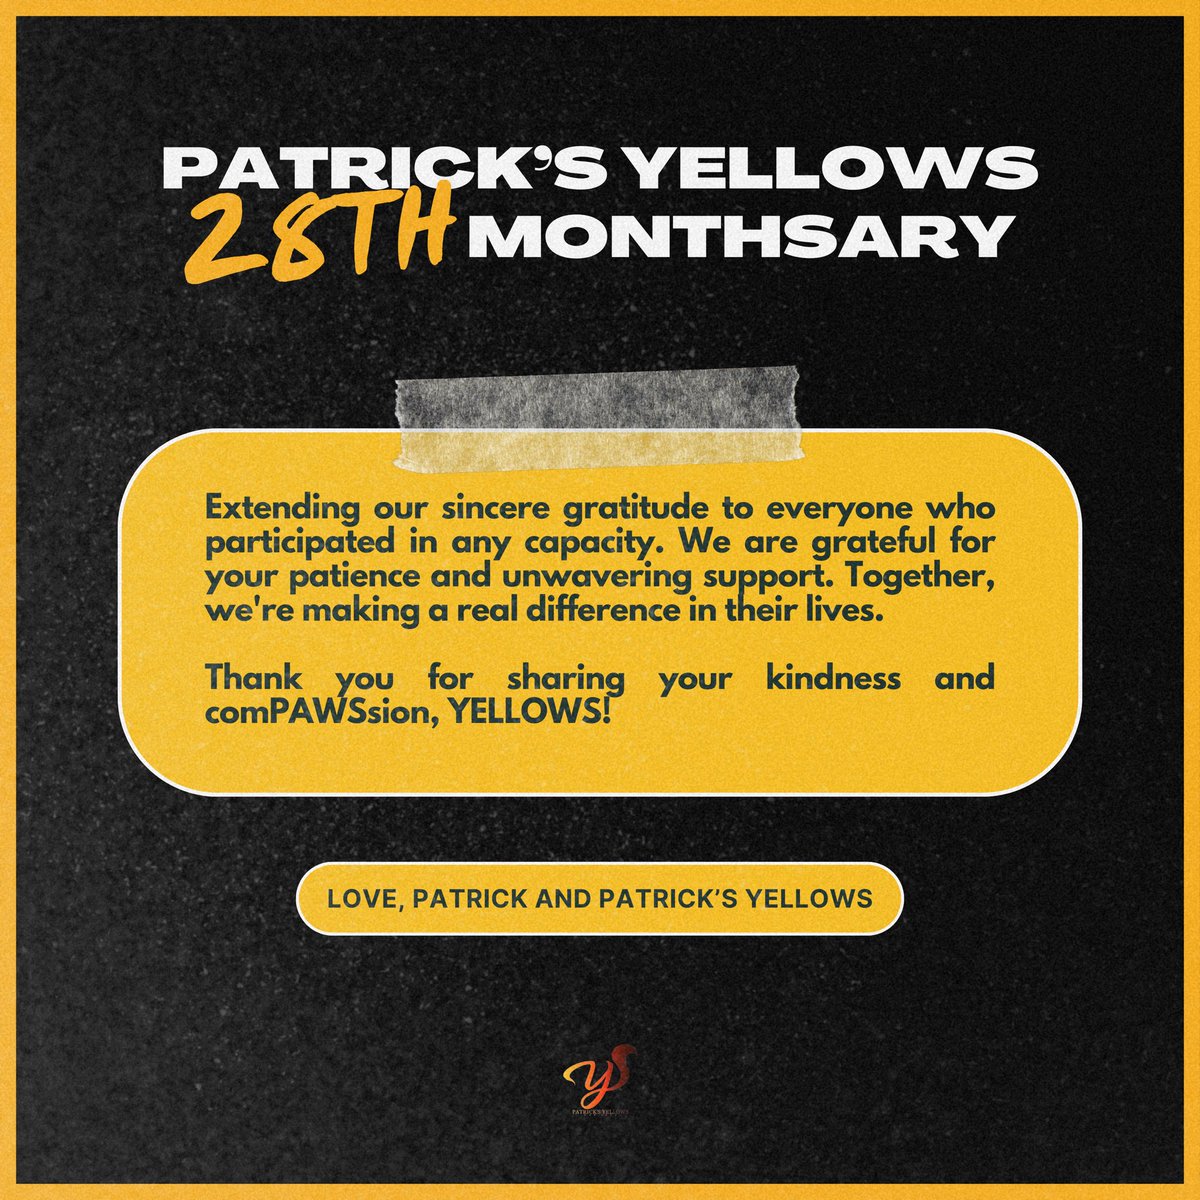 UPDATE: In line with Patrick’s Yellows’ 28th Monthsary and Belated 2nd Anniversary Celebration, we have successfully donated a generous amount to PAWS Philippines. 🐶💛

YELLOWS28Months
@vxonofficial @ptrckrcmr20 
#VXON_PATRICK #PURRfectPlay